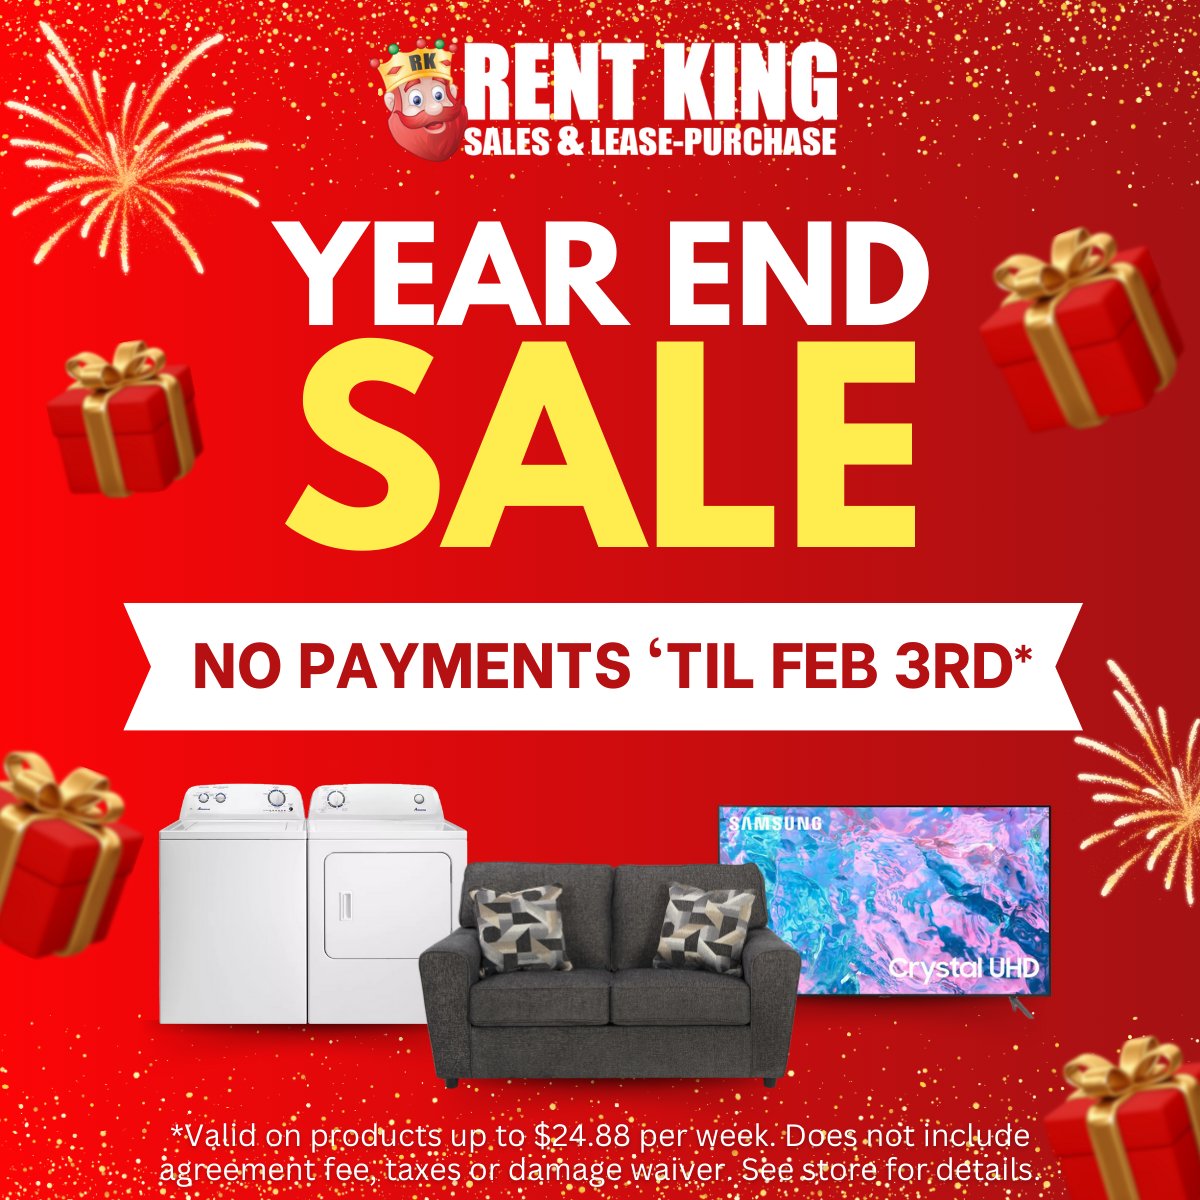 🎊✨ Cheers to Savings at Rent King's Year End Sale! 🛒🏠 Explore unbeatable deals and enjoy the freedom of no payments until Feb 3rd! As we clear out inventory, seize the chance to refresh your space without breaking the bank! 💼🛋️ #RentKing #InventoryClearance #NoPaymentsTilFeb